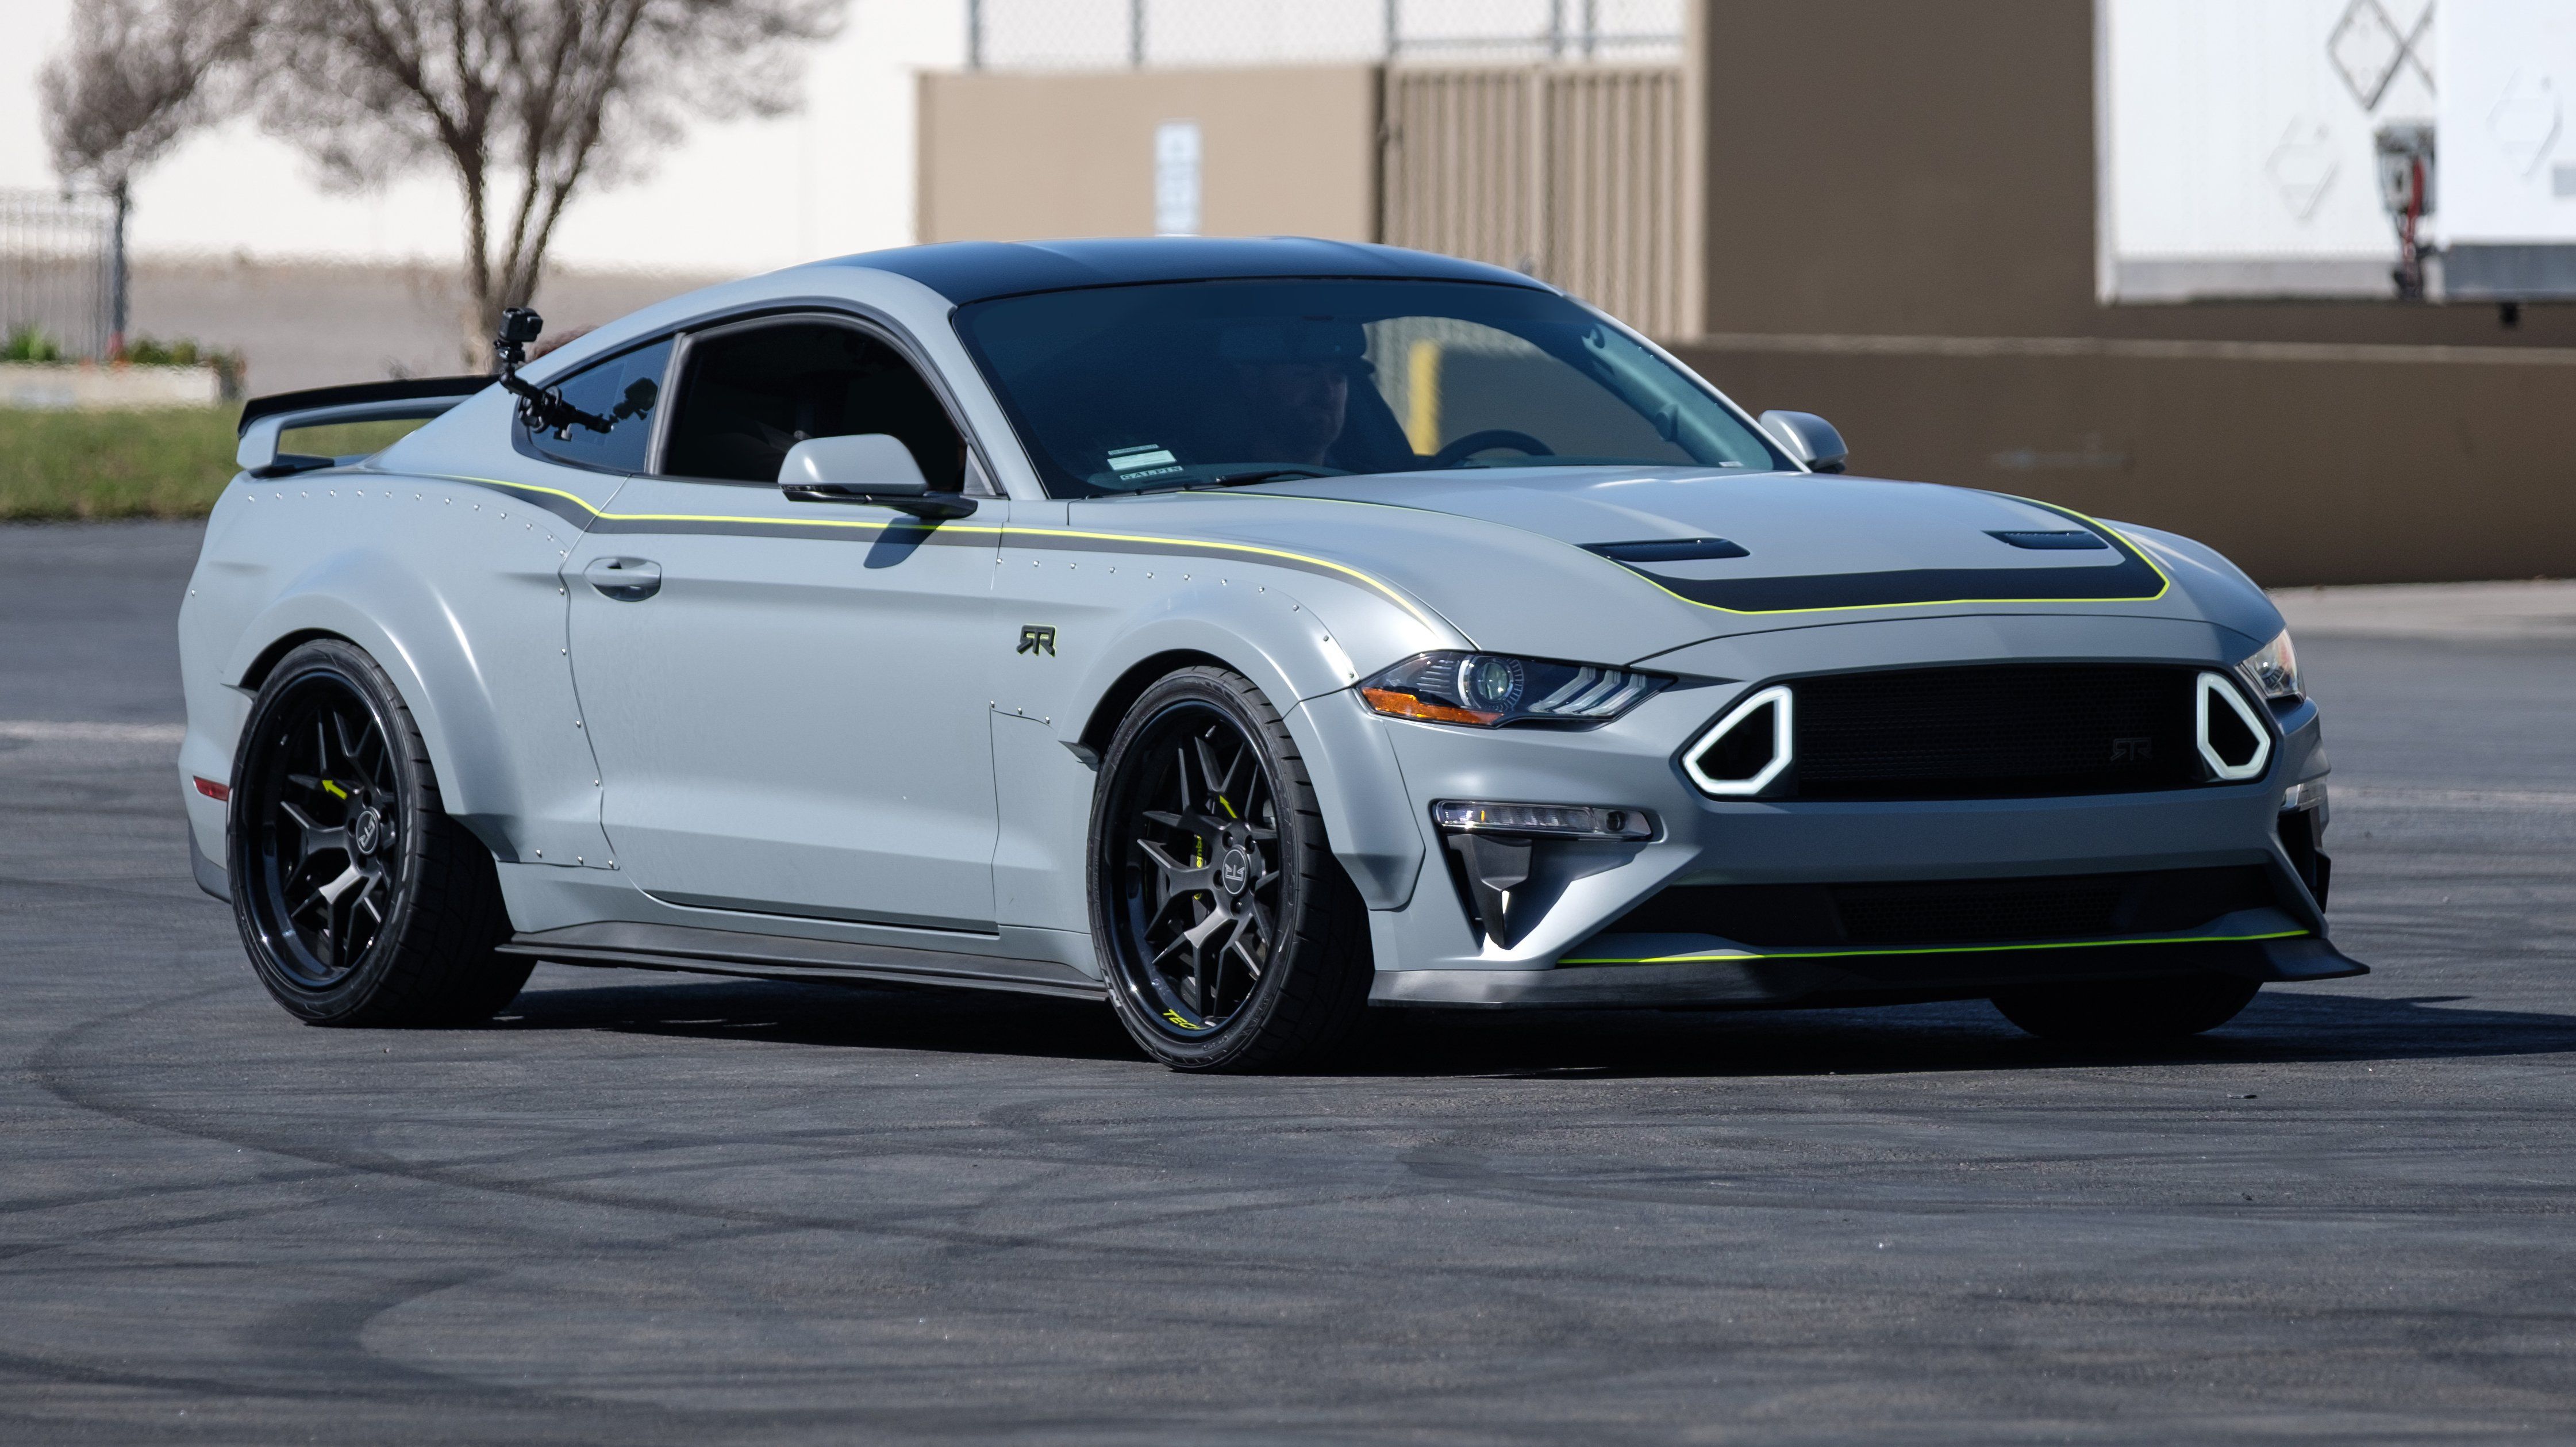 RTR Spec 5 Wide Body Kit (Unpainted) for Mustang (Fastback) 2018-21 | #406731.  Available from NEMESISUK.COM